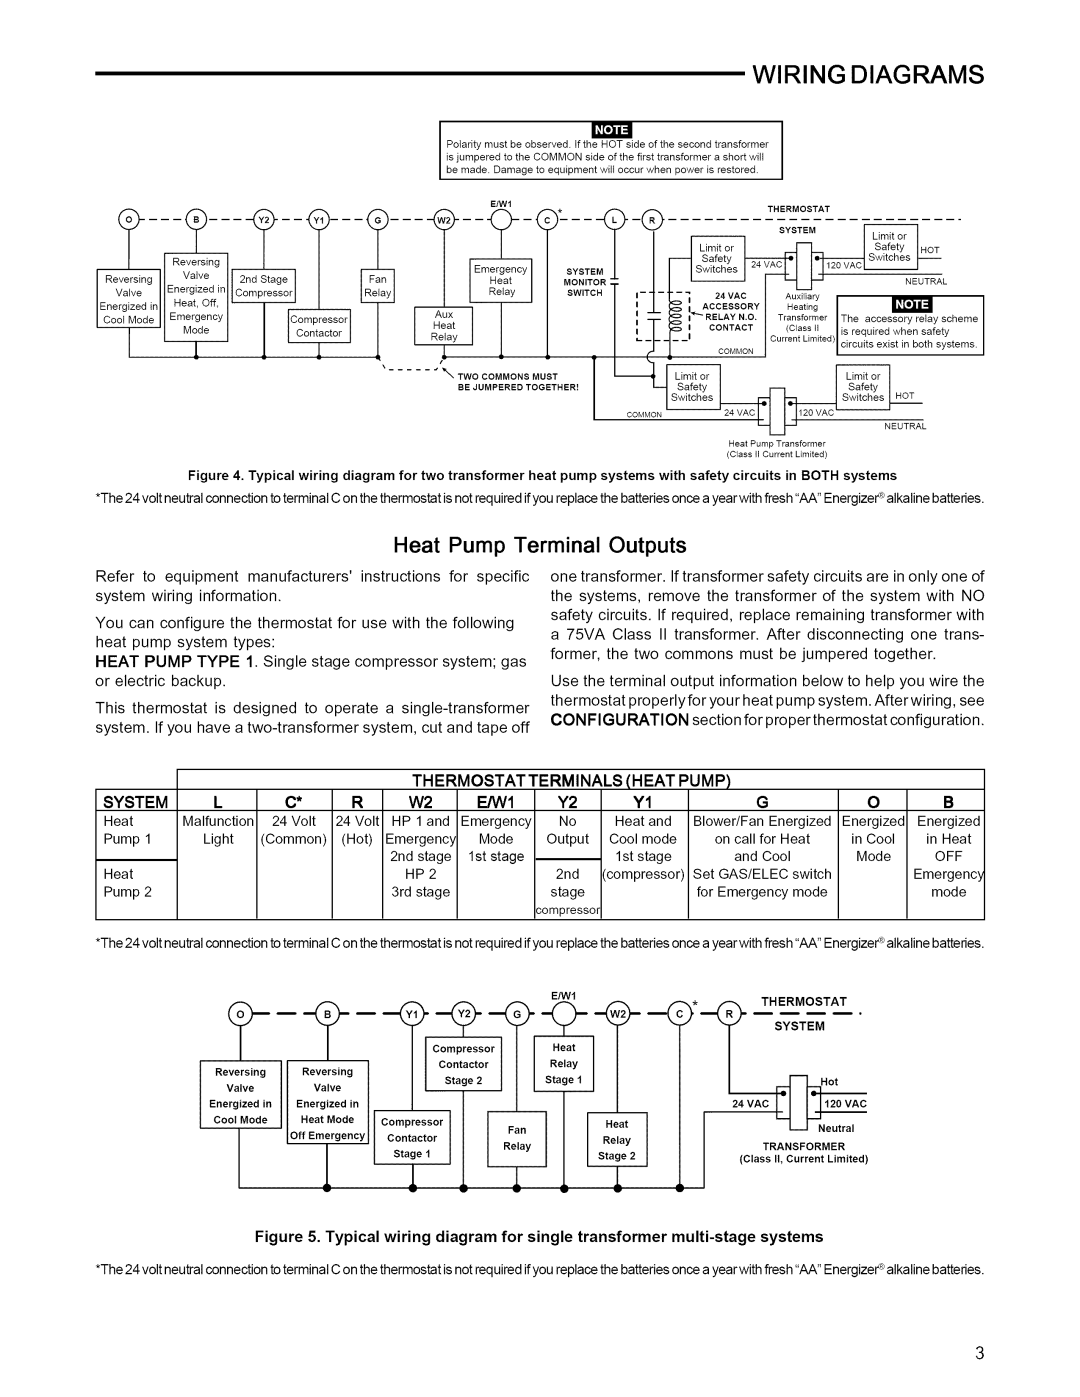 White Rodgers 1F85-277 installation instructions Wiring Diagrams, Heat Pump Terminal Outputs, E/W1 